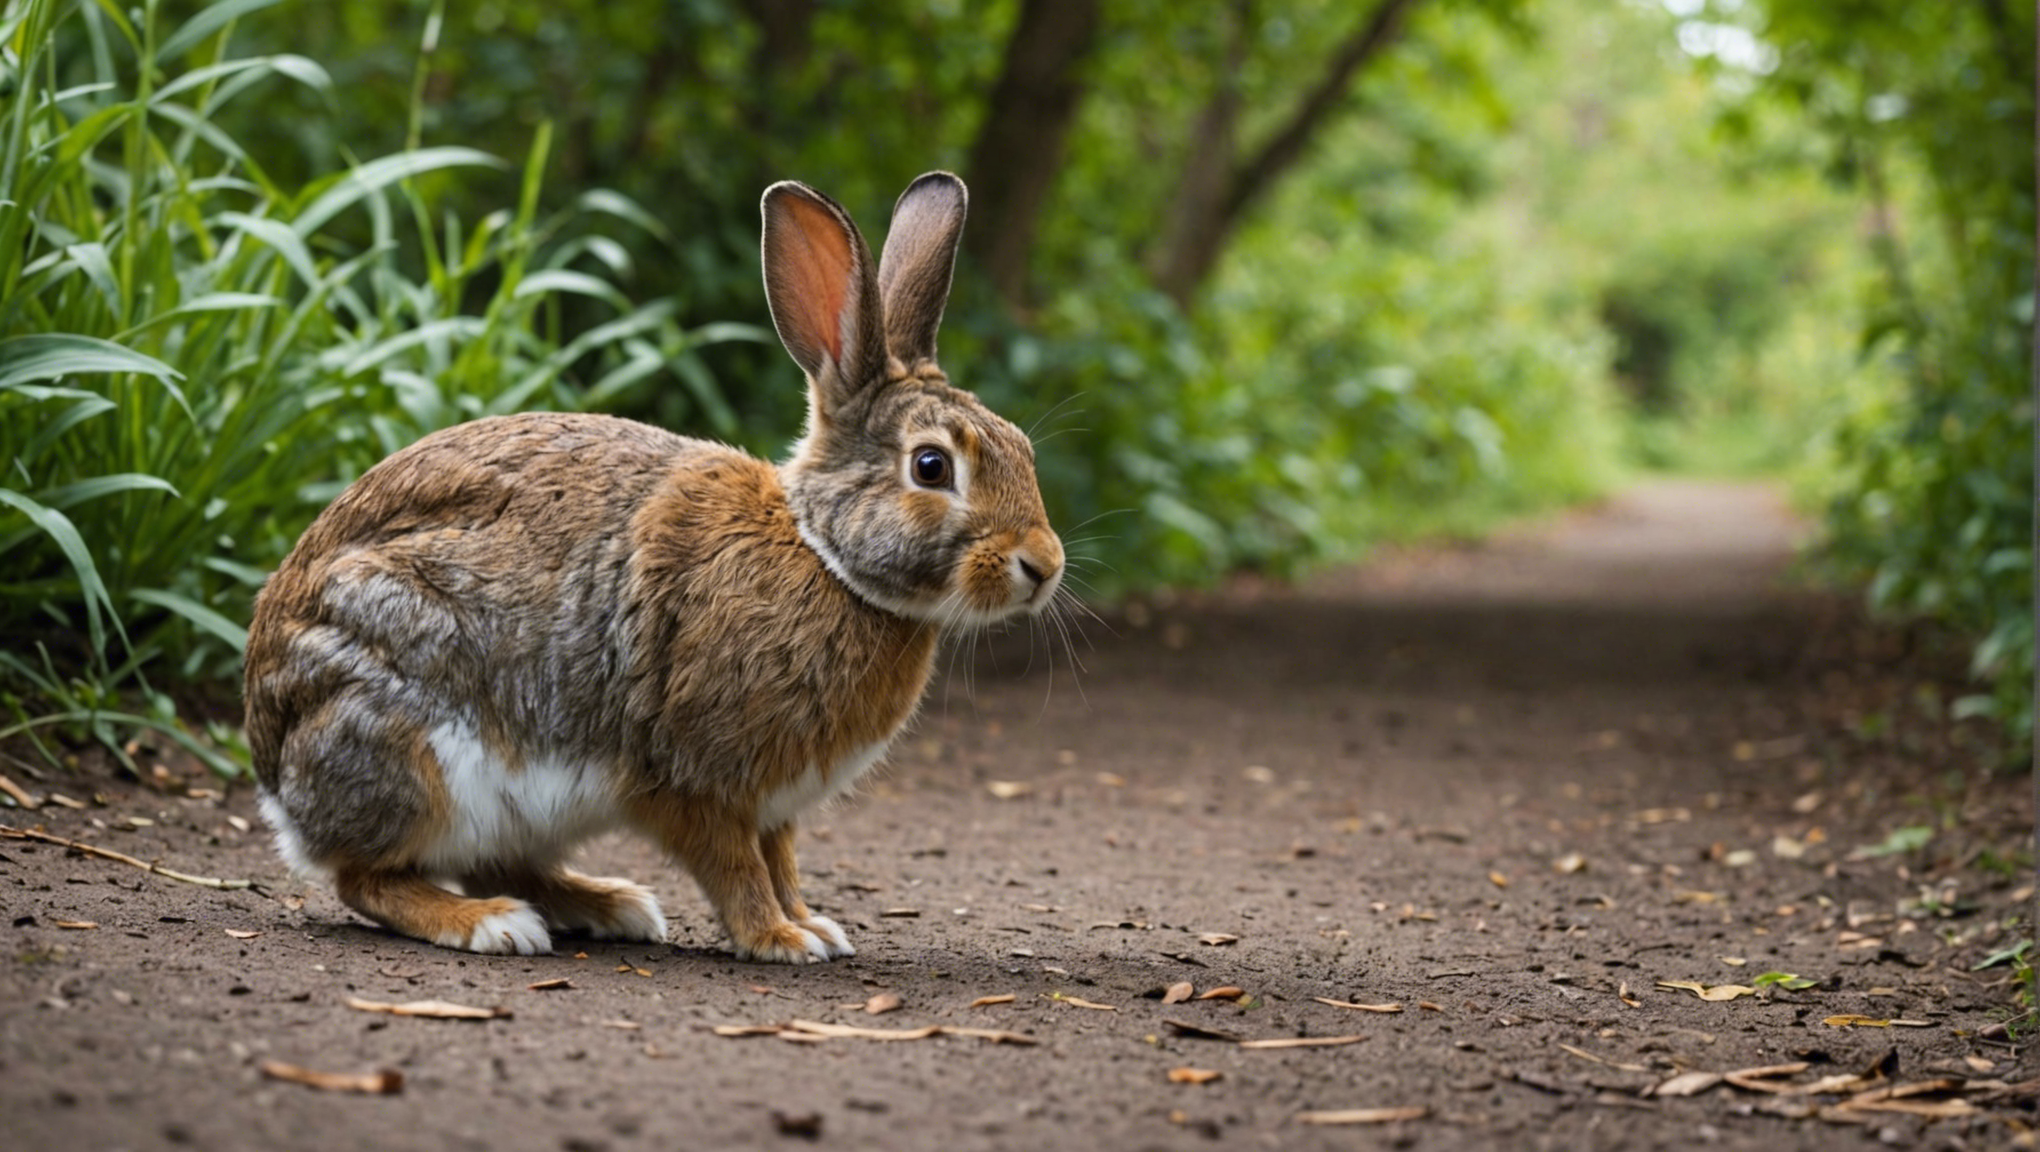 discover the significance of having a rabbit cross your path and the potential meanings rooted in folklore and symbolism.